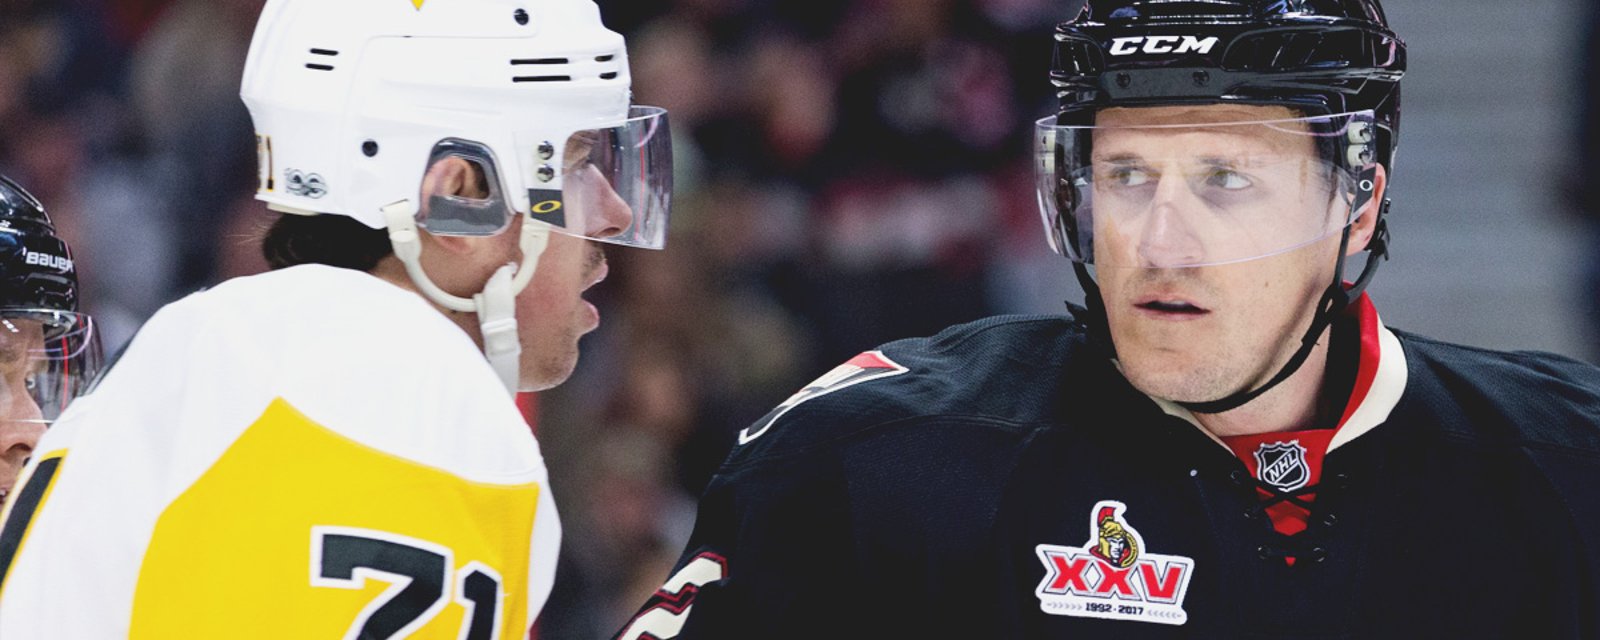 Ottawa AHL coach on Penguins rookie : “When he goes (to the NHL), he plays with Evgeni Malkin”